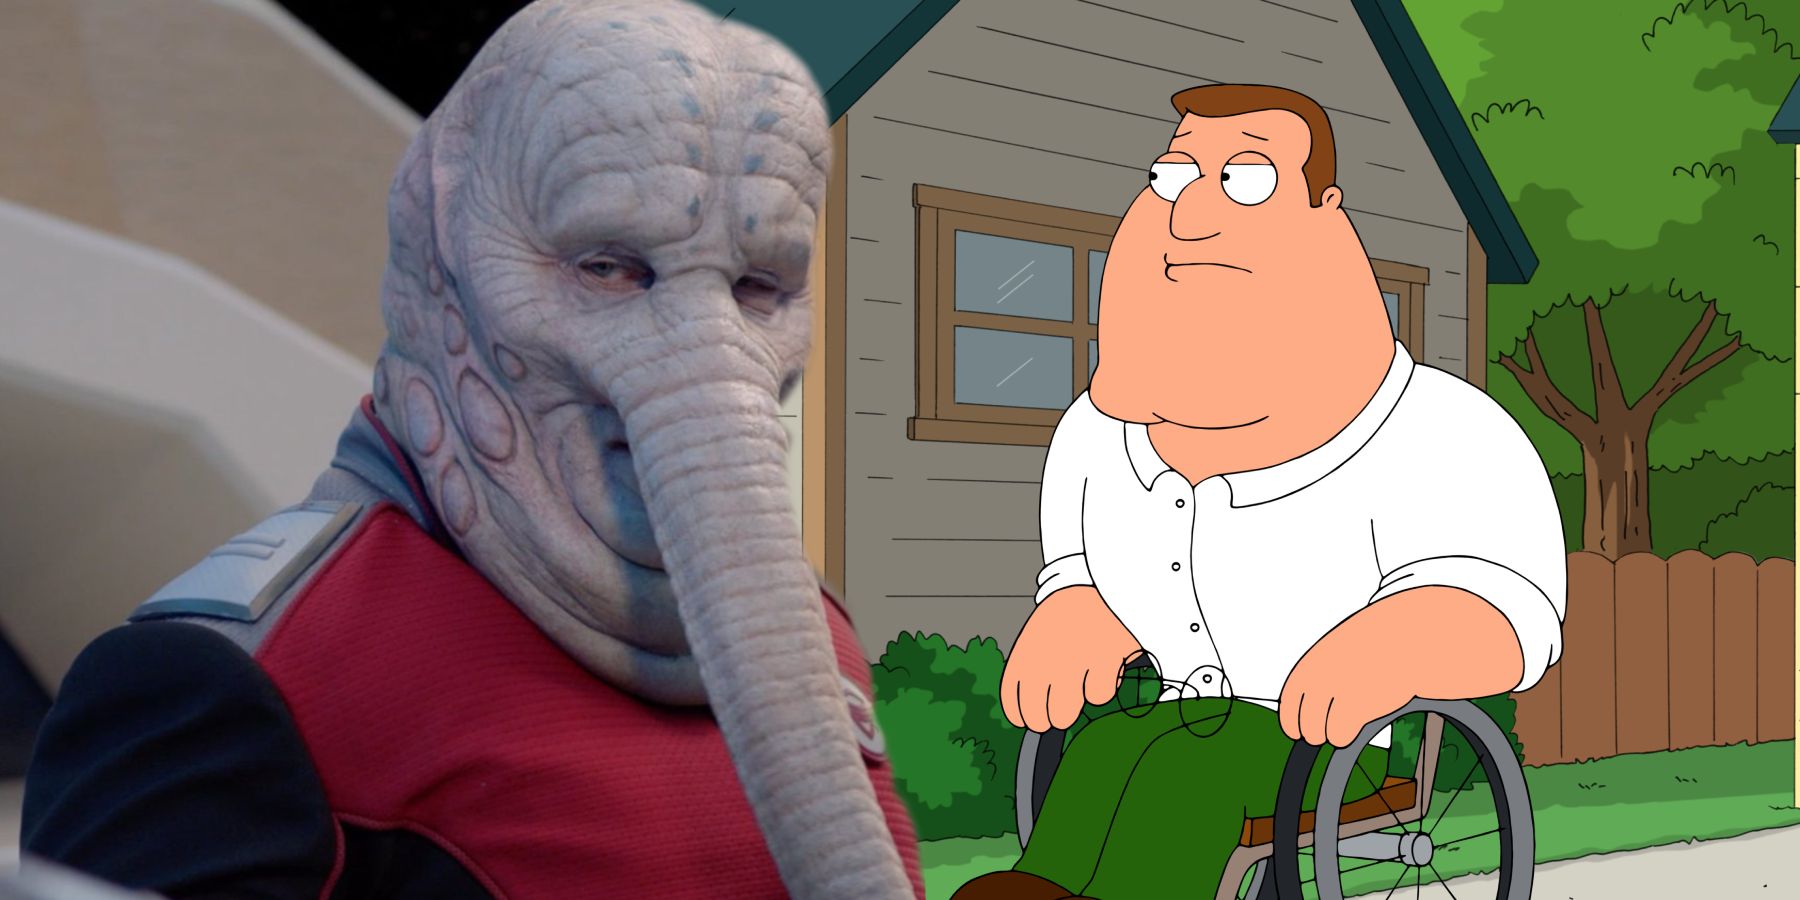 Patrick Warburton as Tharl in The Orville and as Joe Swanson in Family Guy